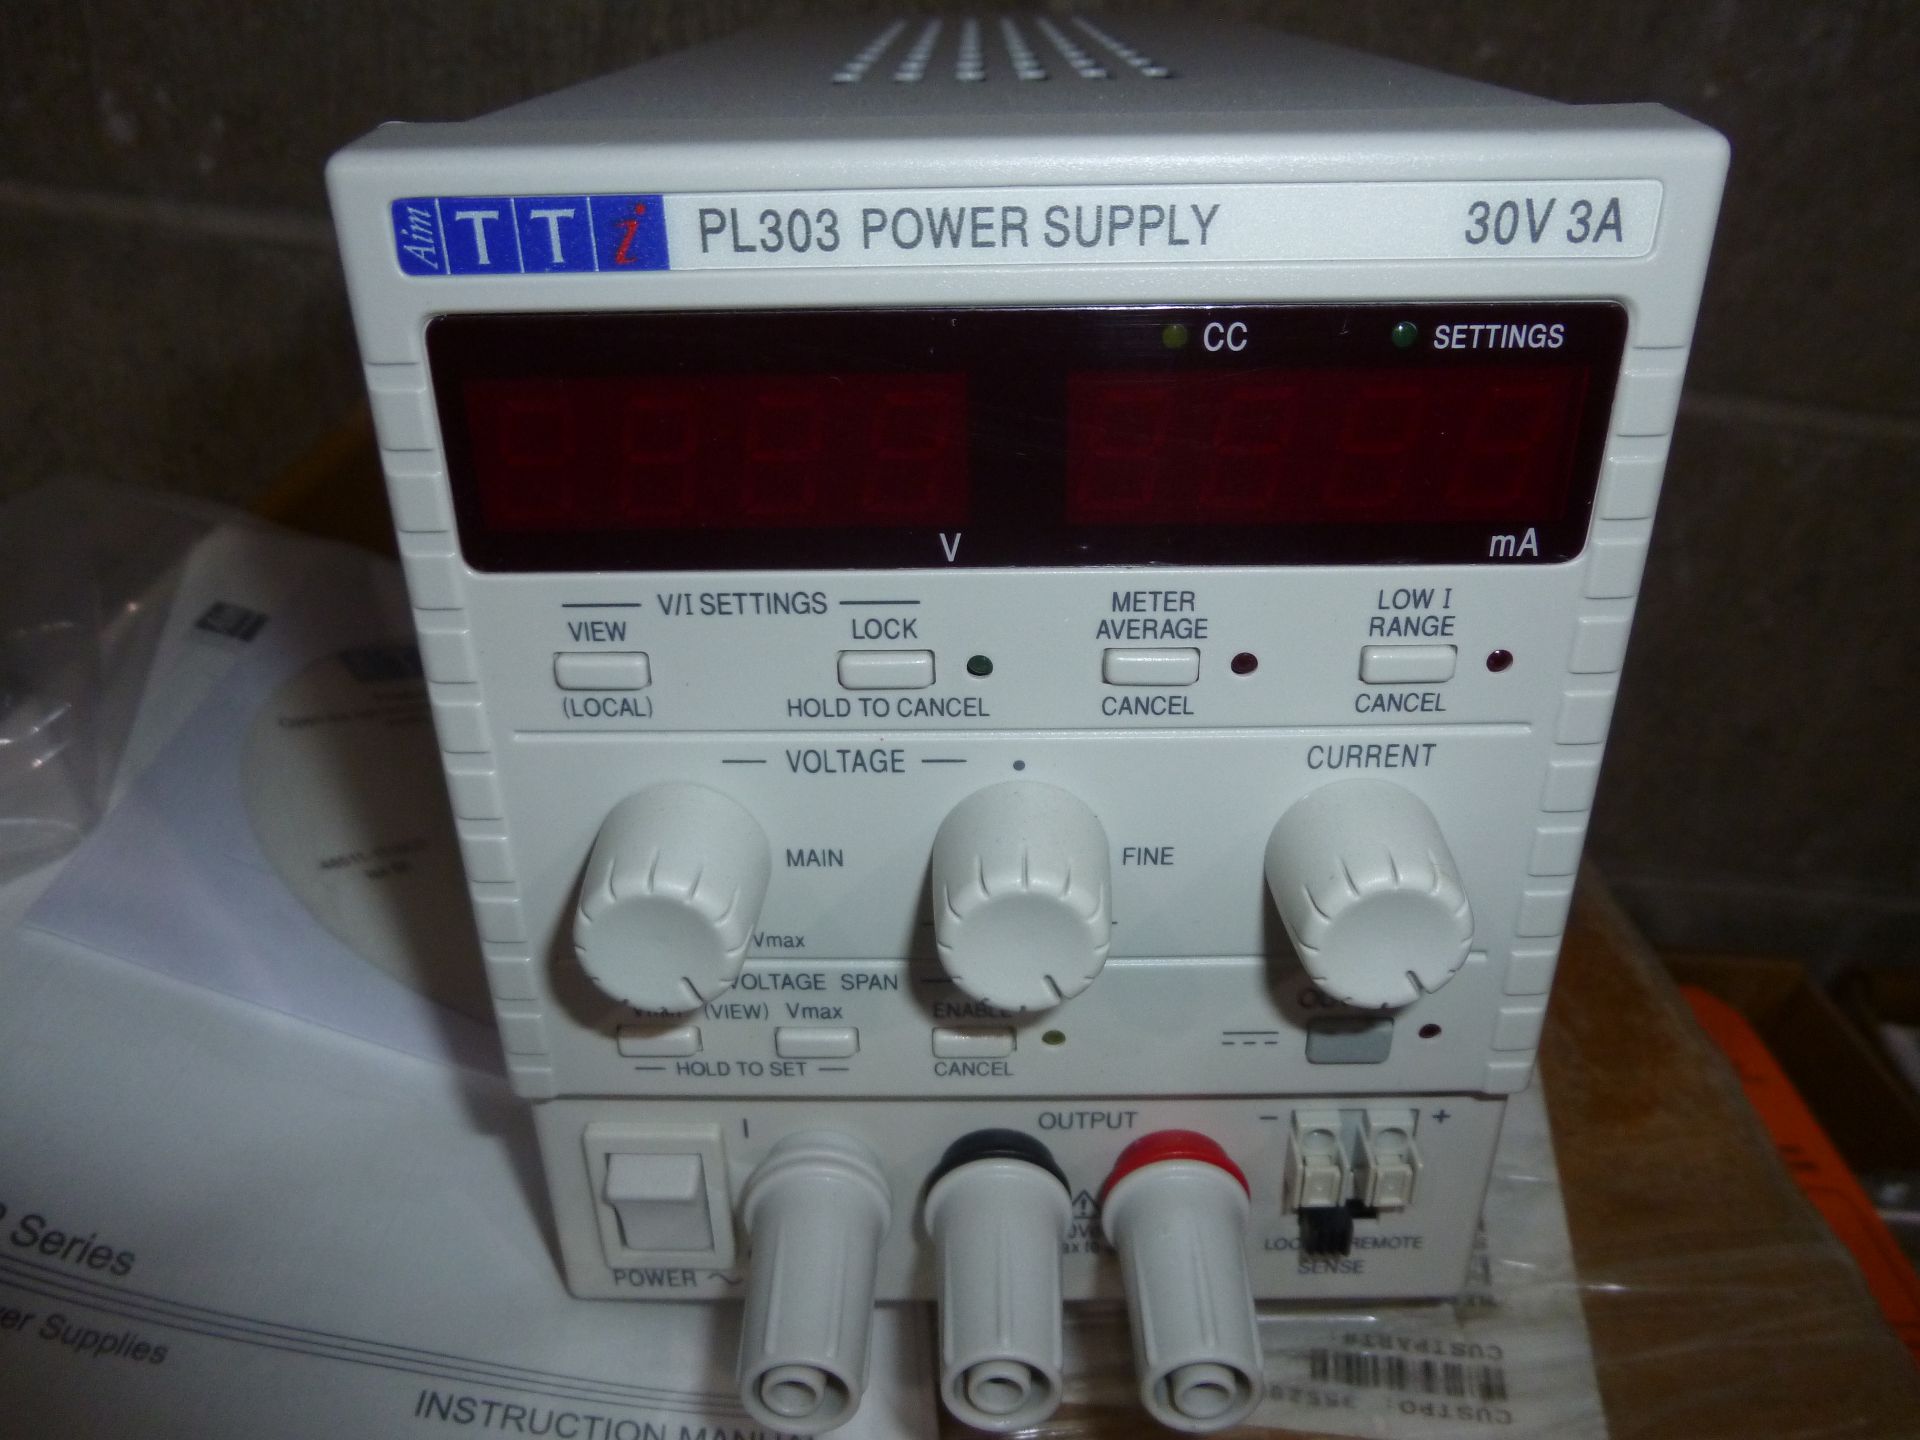 Aim Tti, PL303 power supply, new in box, as always with Brolyn LLC auctions, all lots can be - Image 2 of 2